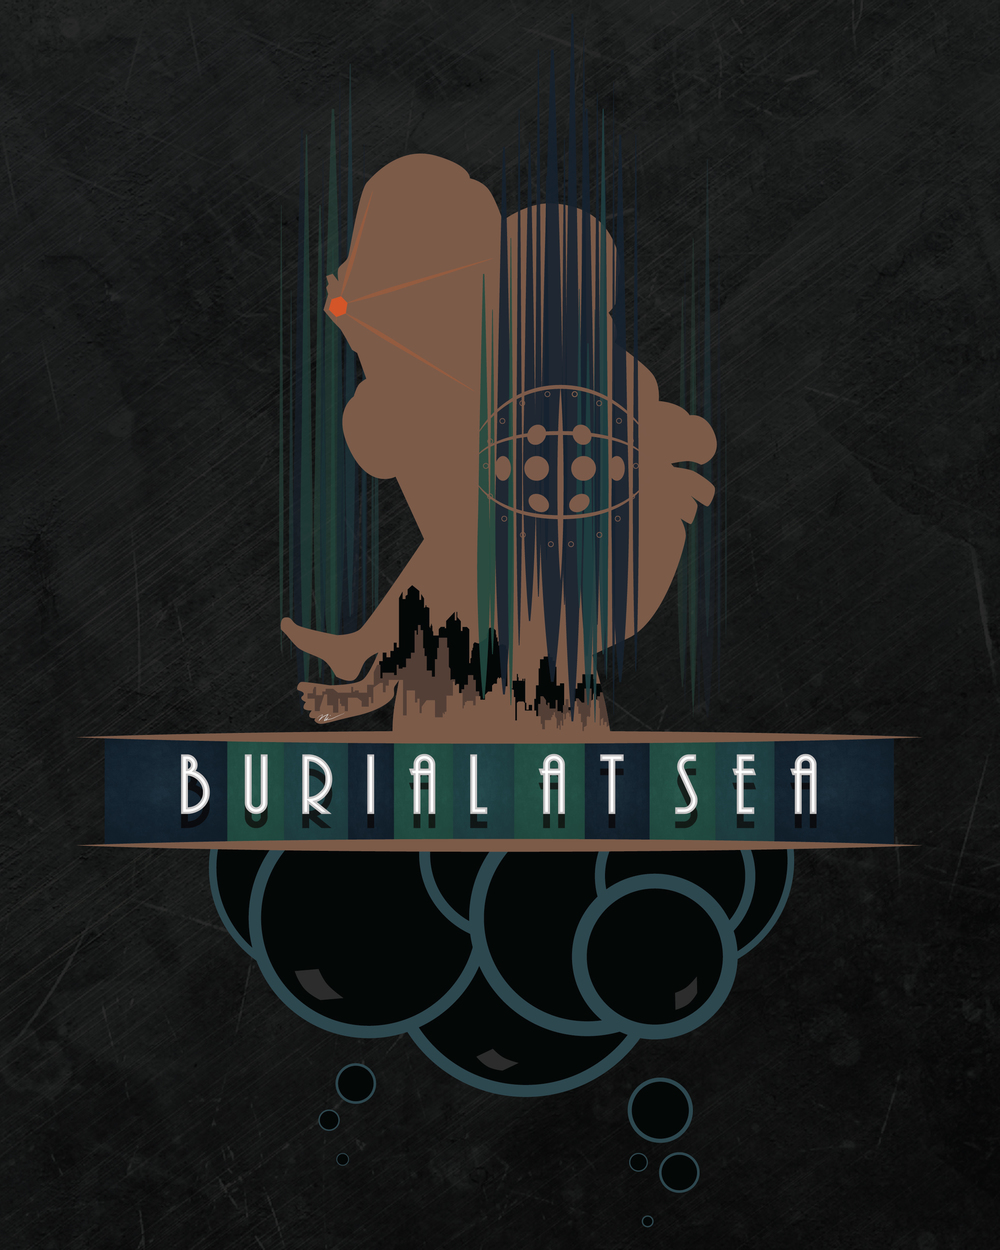 BioShock Infinite: Burial at Sea Episode 2 Poster by NCCreations on  DeviantArt